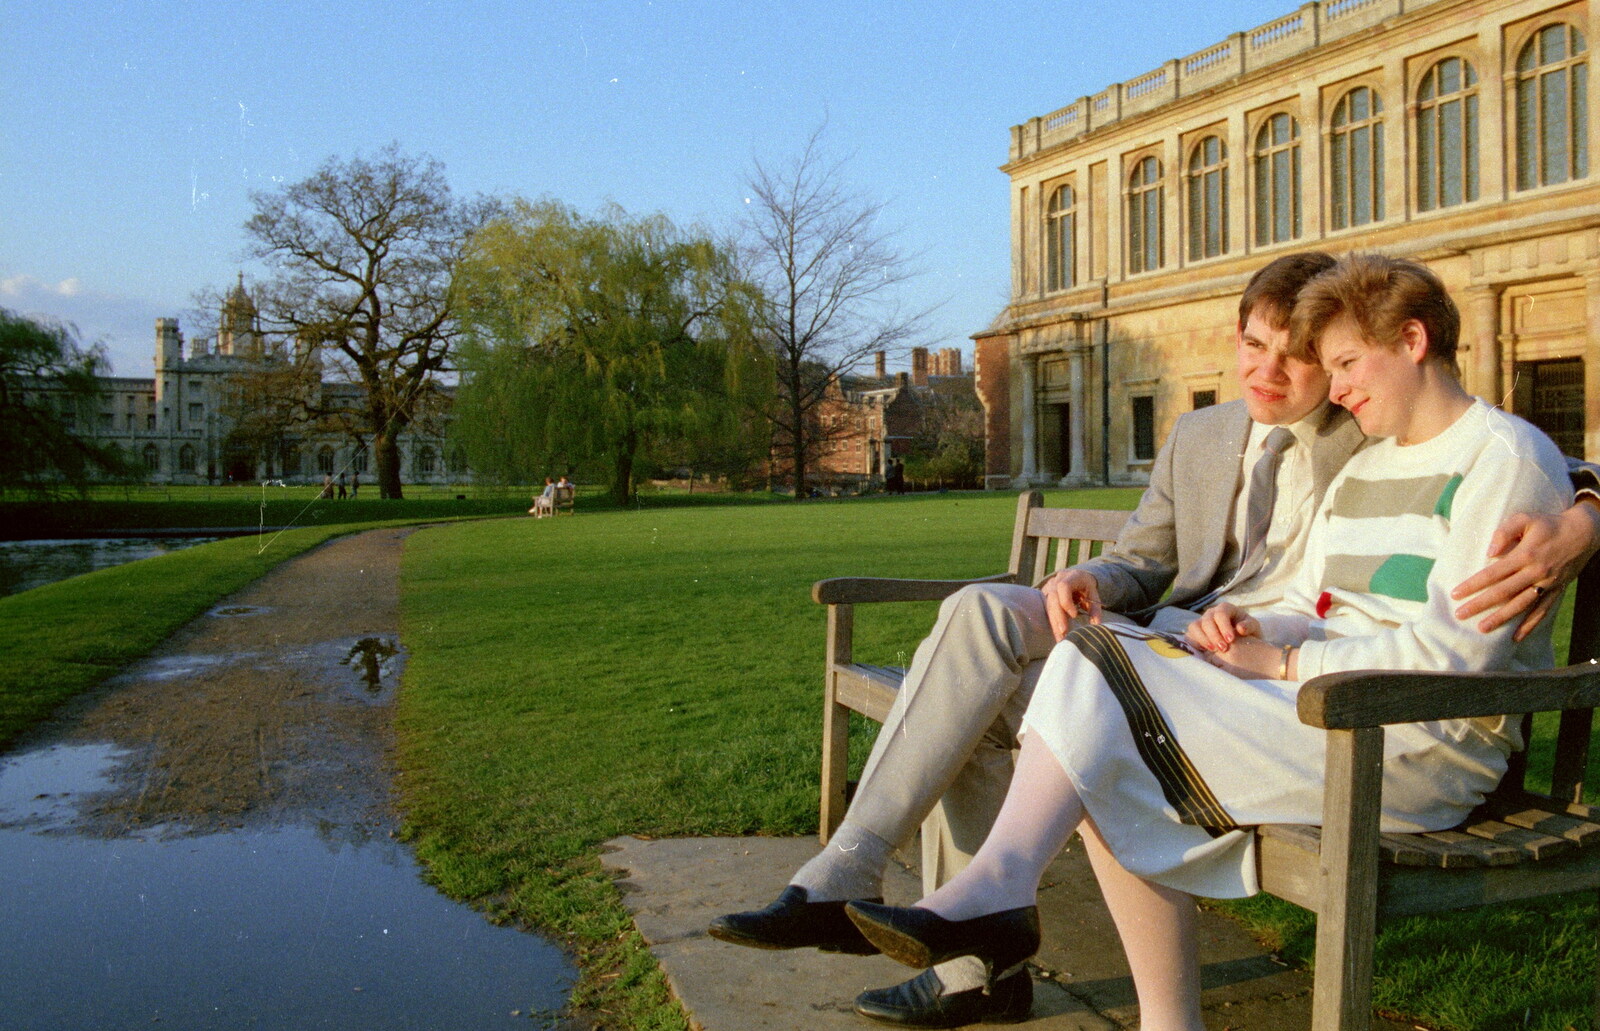 By the banks of the Cam, in the evening light from A Trip to Trinity College, Cambridge - 23rd March 1986